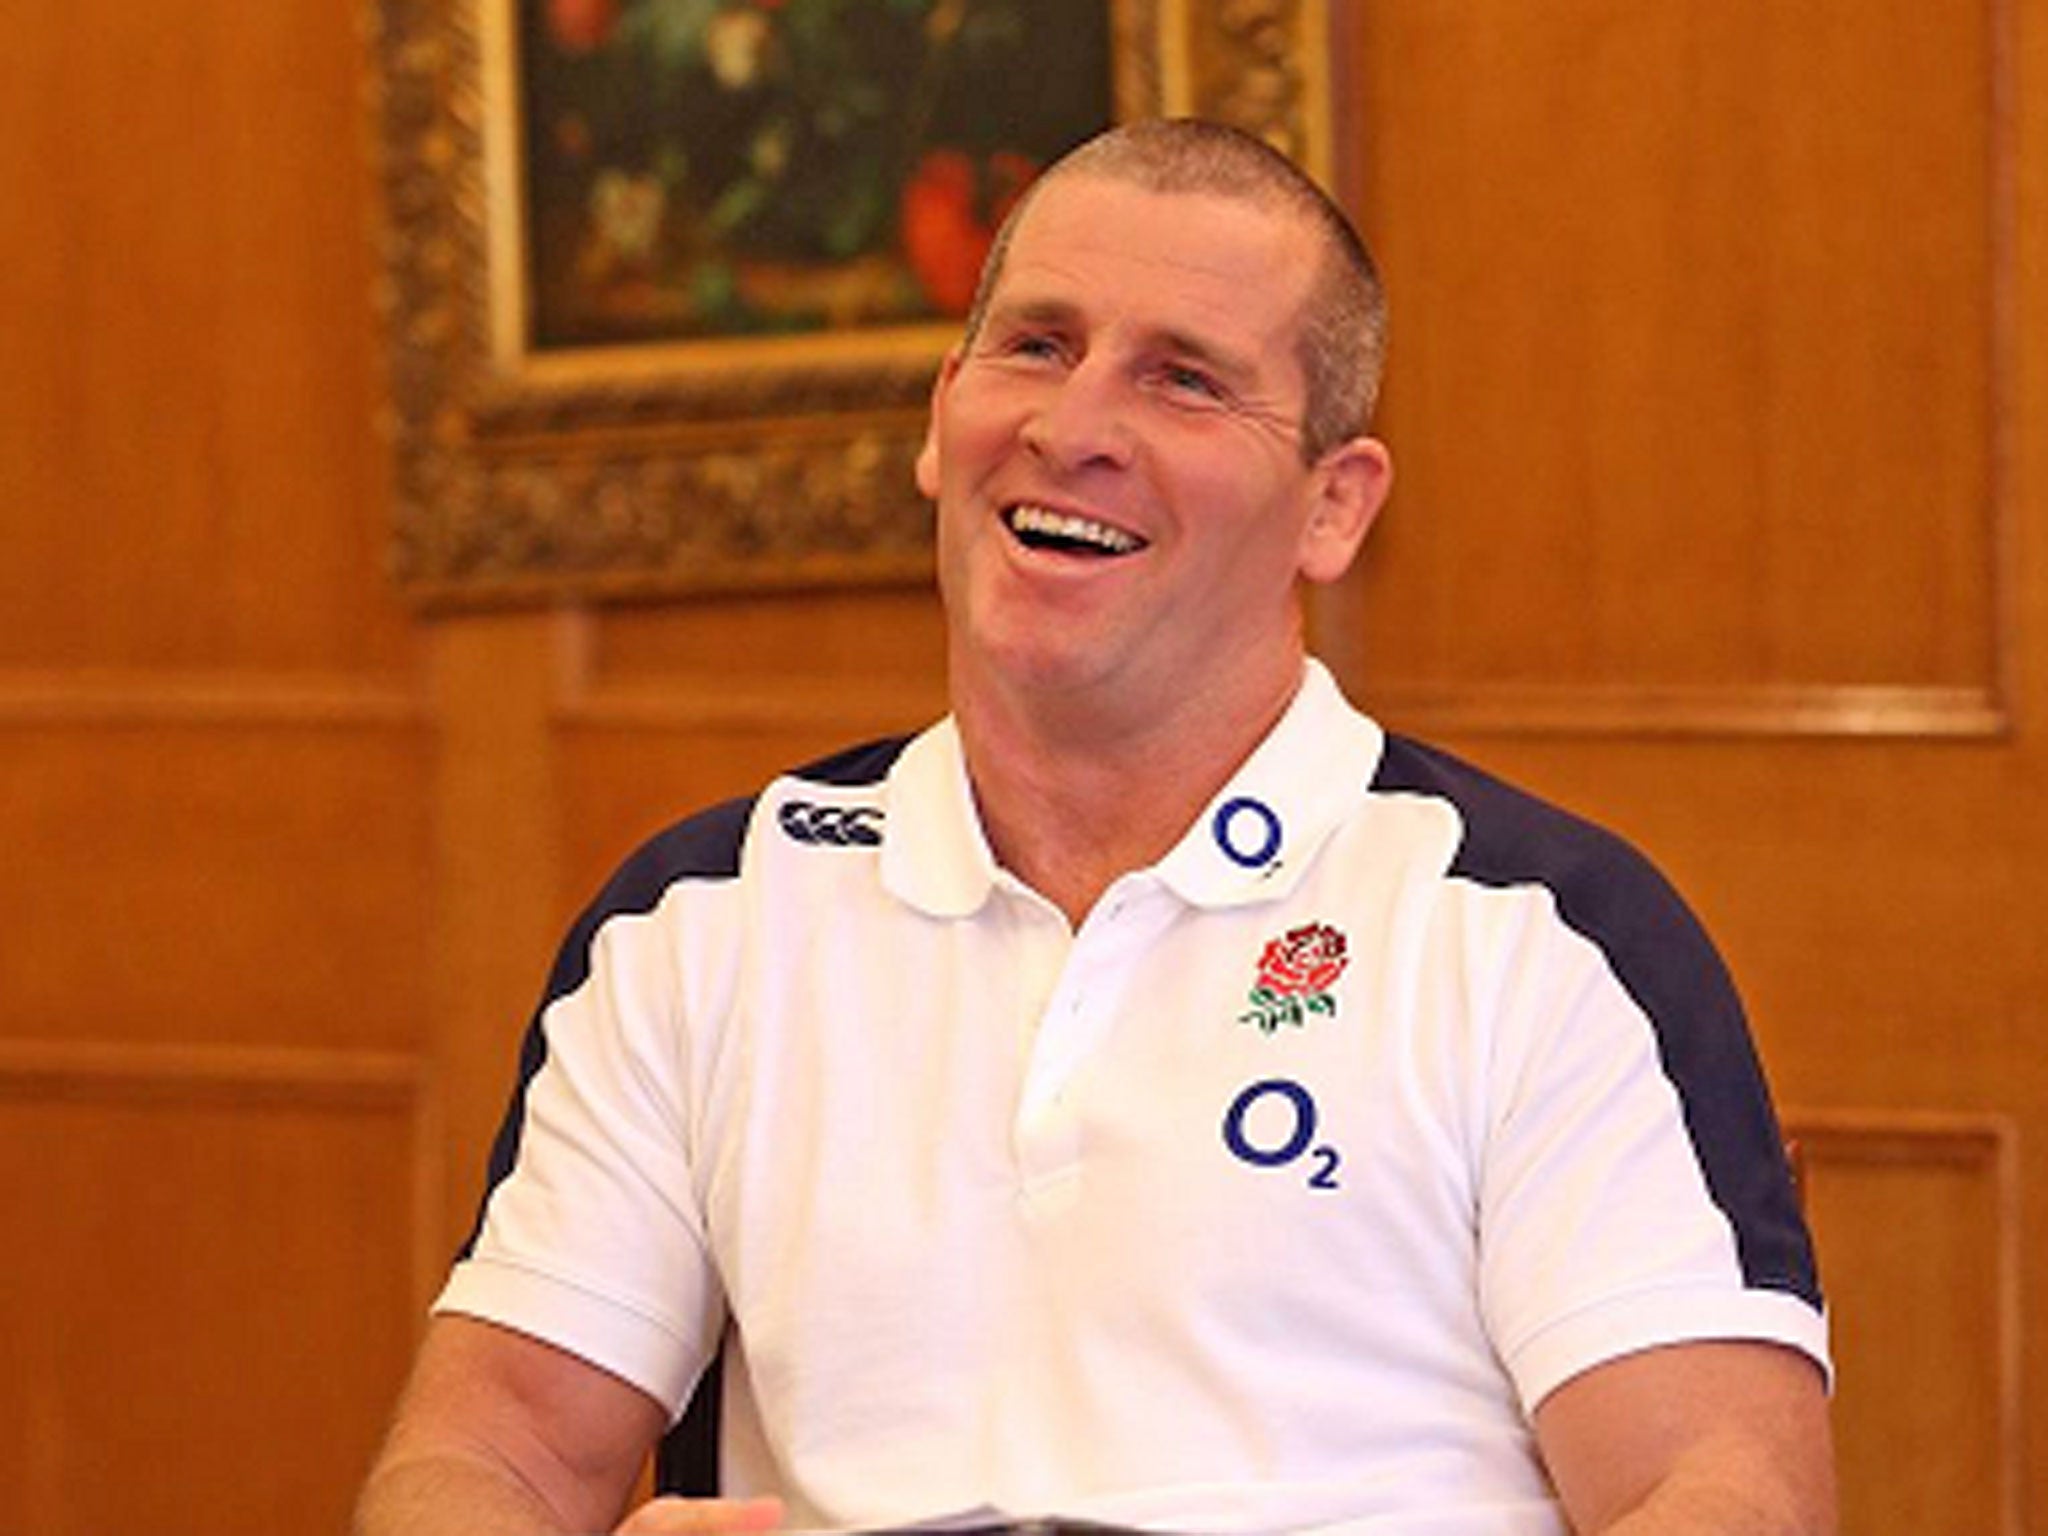 Stuart Lancaster, the England head coach faces the media at a conference held prior to the England training session held at Pennyhill Park